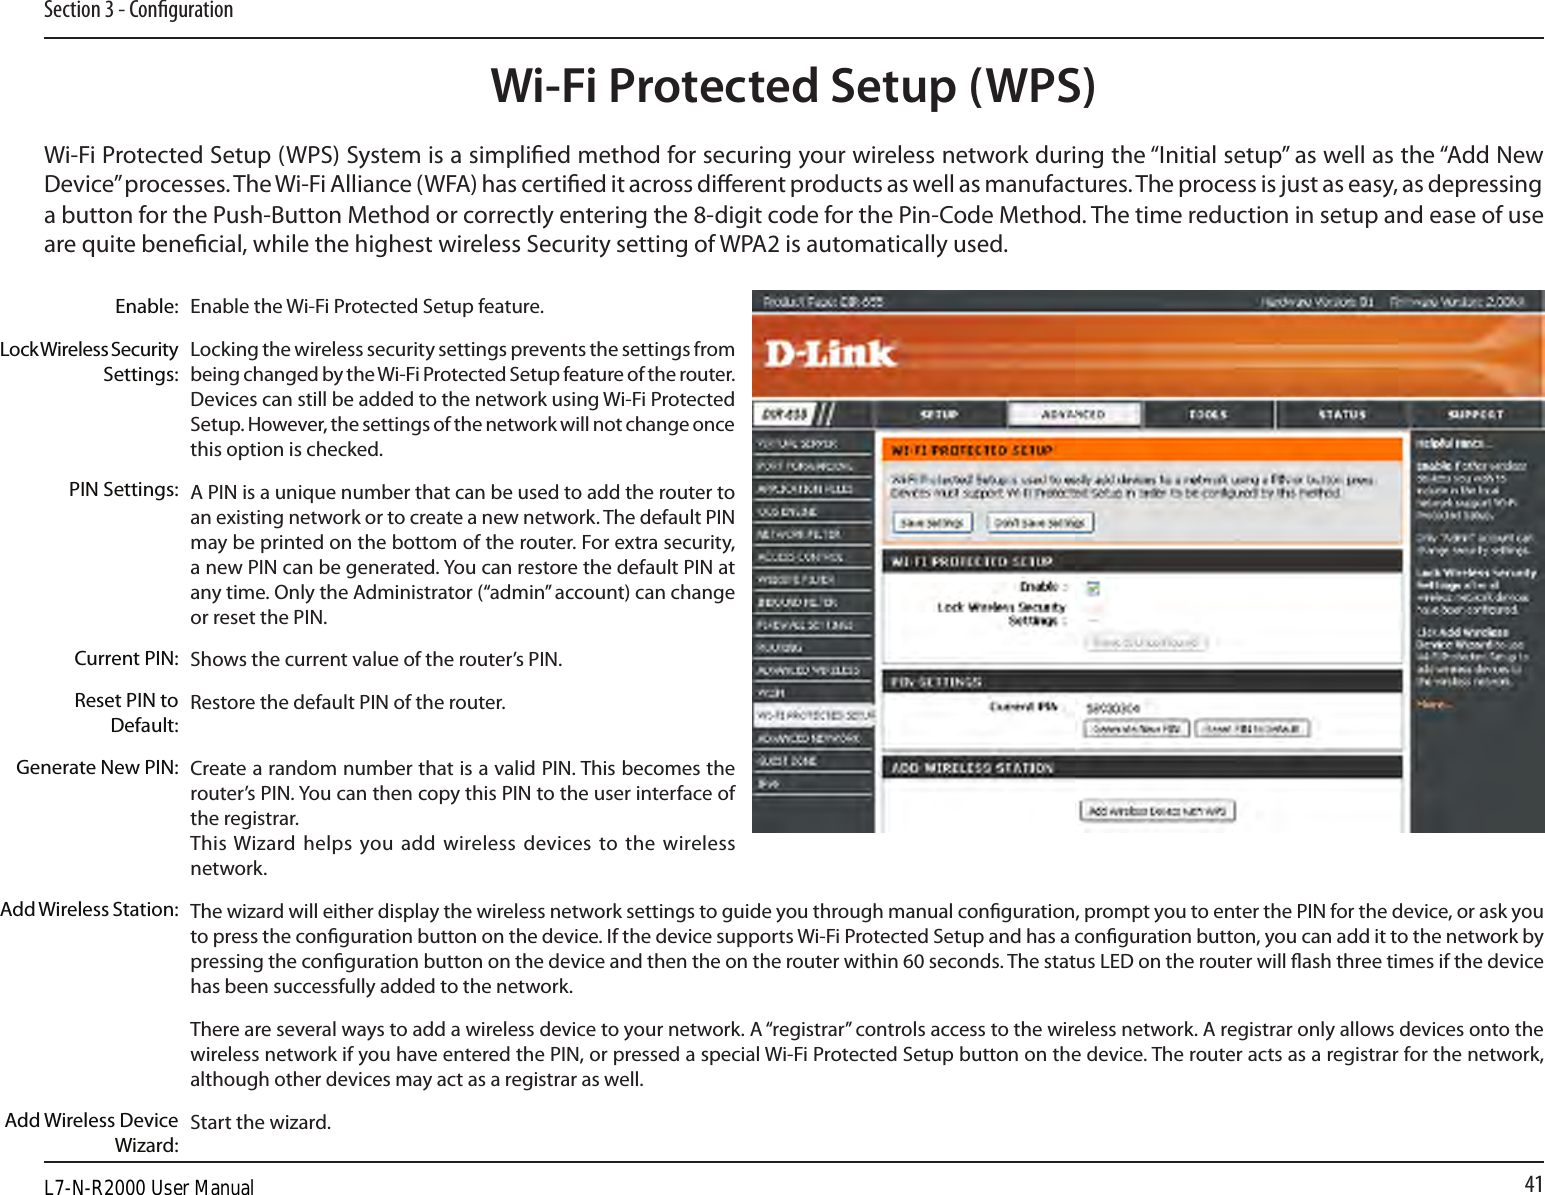 41Section 3 - CongurationWi-Fi Protected Setup (WPS)Enable the Wi-Fi Protected Setup feature. Locking the wireless security settings prevents the settings from being changed by the Wi-Fi Protected Setup feature of the router. Devices can still be added to the network using Wi-Fi Protected Setup. However, the settings of the network will not change once this option is checked.A PIN is a unique number that can be used to add the router to an existing network or to create a new network. The default PIN may be printed on the bottom of the router. For extra security, a new PIN can be generated. You can restore the default PIN at any time. Only the Administrator (“admin” account) can change or reset the PIN. Shows the current value of the router’s PIN. Restore the default PIN of the router. Create a random number that is a valid PIN. This becomes the router’s PIN. You can then copy this PIN to the user interface of the registrar.This Wizard helps you  add wireless devices to  the wireless network.The wizard will either display the wireless network settings to guide you through manual conguration, prompt you to enter the PIN for the device, or ask you to press the conguration button on the device. If the device supports Wi-Fi Protected Setup and has a conguration button, you can add it to the network by pressing the conguration button on the device and then the on the router within 60 seconds. The status LED on the router will ash three times if the device has been successfully added to the network.There are several ways to add a wireless device to your network. A “registrar” controls access to the wireless network. A registrar only allows devices onto the wireless network if you have entered the PIN, or pressed a special Wi-Fi Protected Setup button on the device. The router acts as a registrar for the network, although other devices may act as a registrar as well.Start the wizard.Enable:Lock Wireless Security Settings:PIN Settings:Current PIN:Reset PIN to Default:Generate New PIN:Add Wireless Station:Add Wireless Device Wizard:Wi-Fi Protected Setup (WPS) System is a simplied method for securing your wireless network during the “Initial setup” as well as the “Add New Device” processes. The Wi-Fi Alliance (WFA) has certied it across dierent products as well as manufactures. The process is just as easy, as depressing a button for the Push-Button Method or correctly entering the 8-digit code for the Pin-Code Method. The time reduction in setup and ease of use are quite benecial, while the highest wireless Security setting of WPA2 is automatically used.L7-N-R2000 User Manual